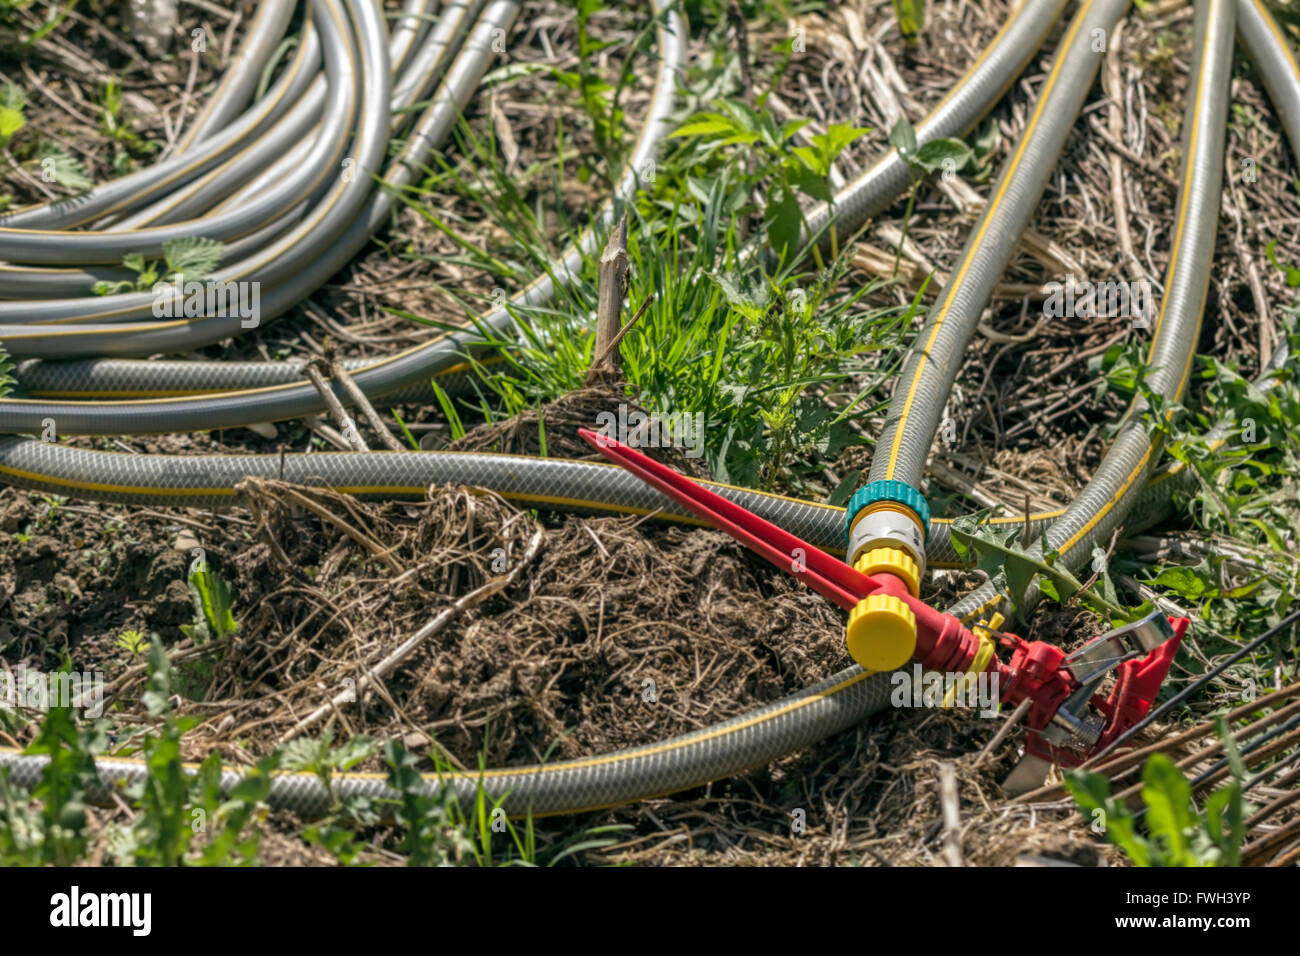 Hoses for watering garden at sunny spring day Stock Photo